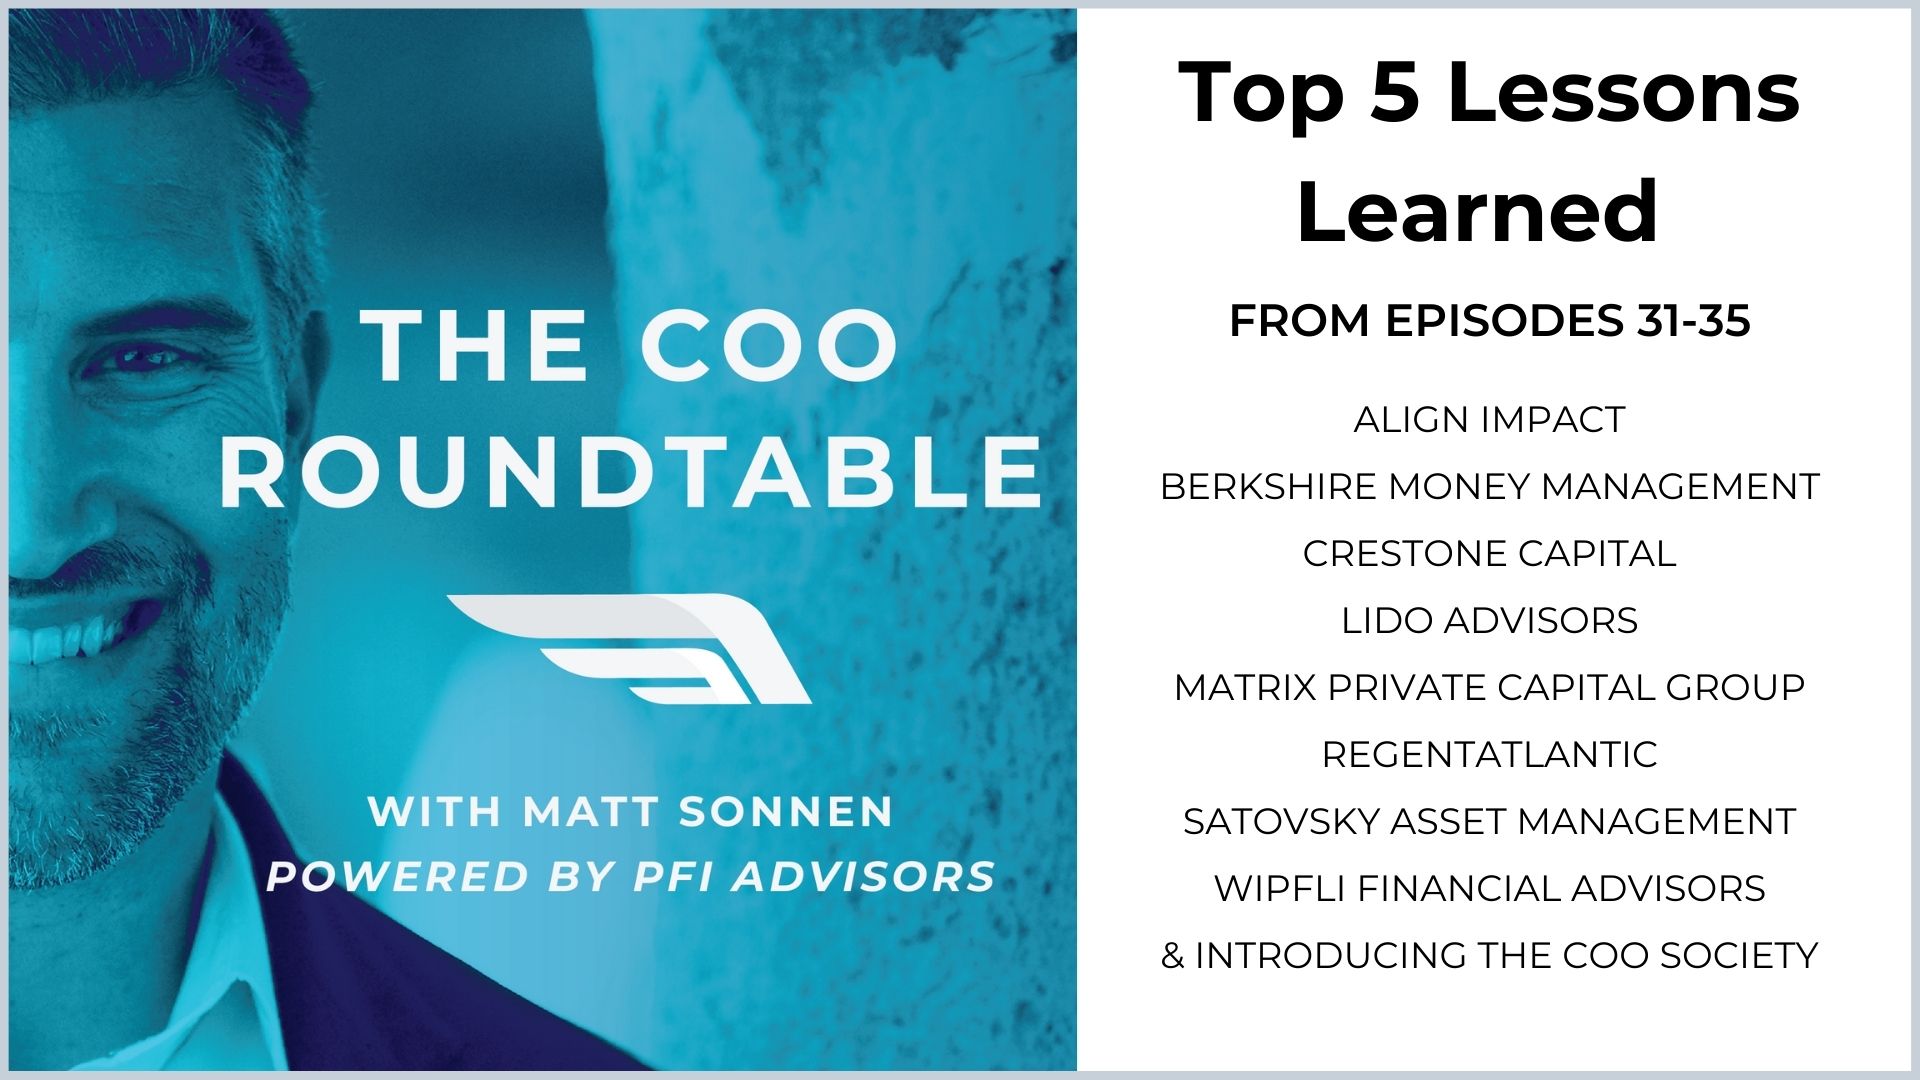 Top 5 Lessons Learned from Episodes  31-35 of The COO Roundtable